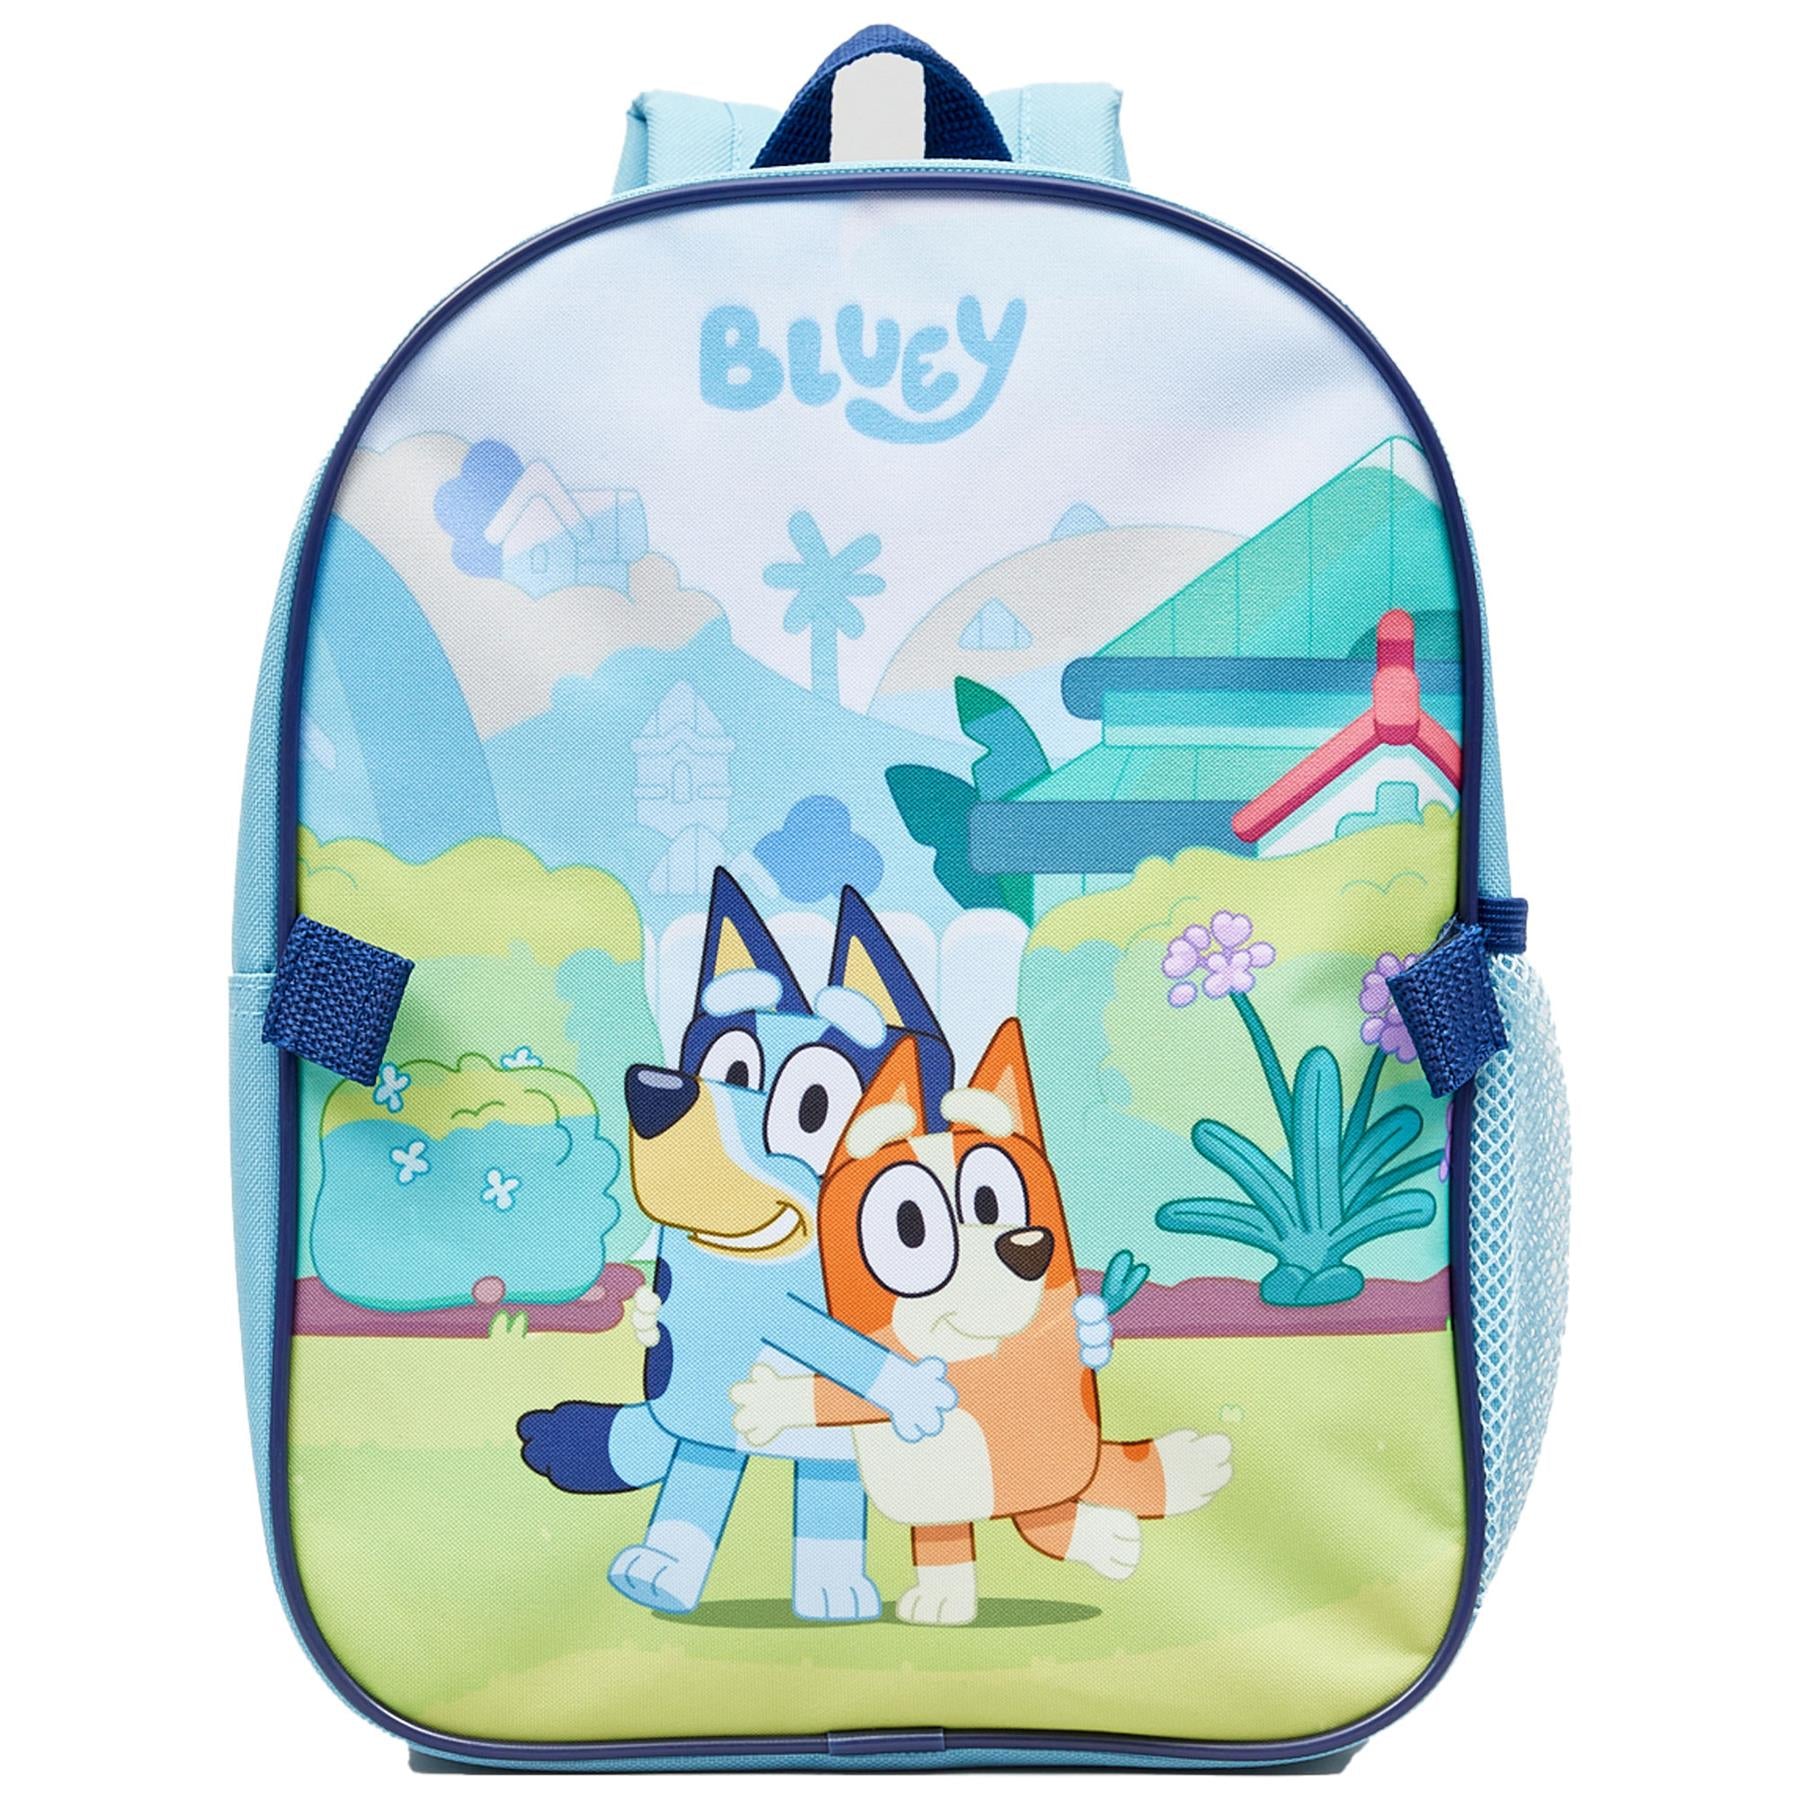 Kids Officially Licensed Bluey Cousins Backpack Lunch Bag Set Amazing School Bag